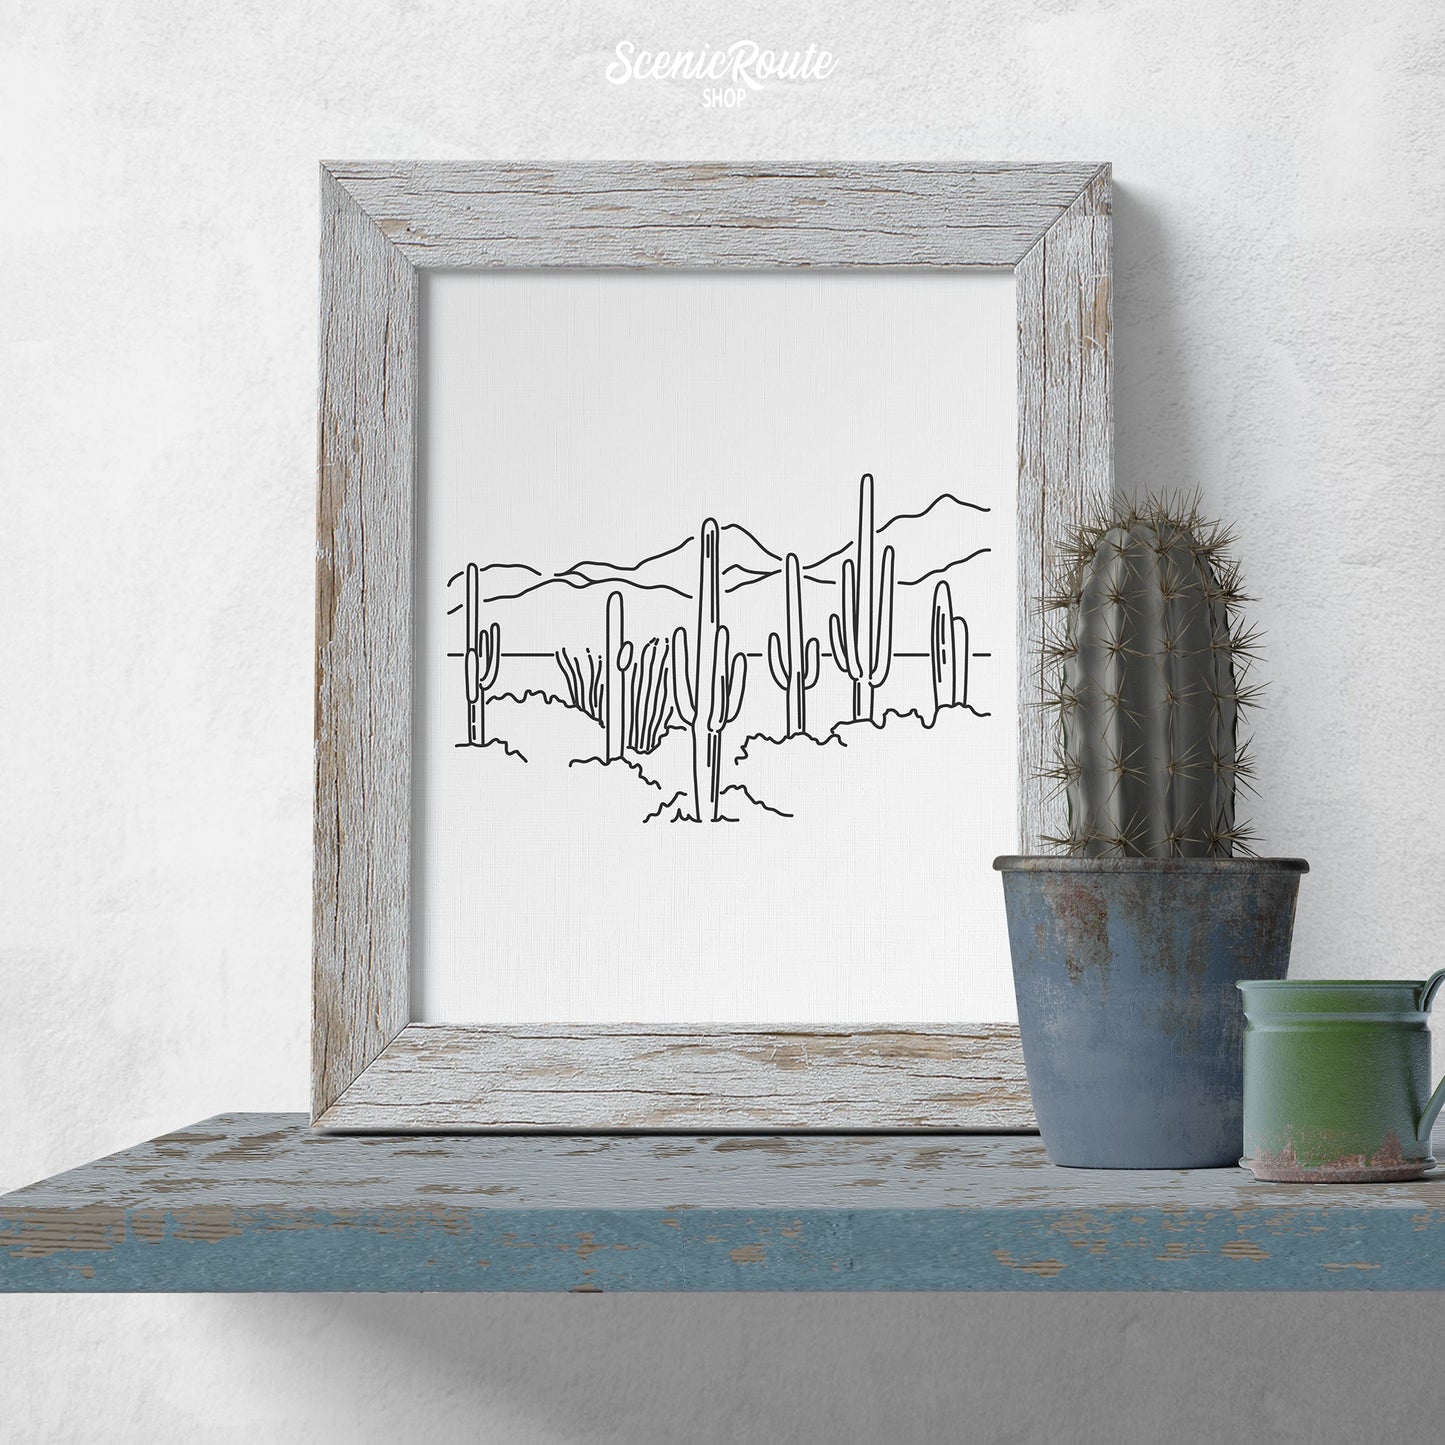 A framed line art drawing of Saguaro National Park on a blue shelf with a potted cactus